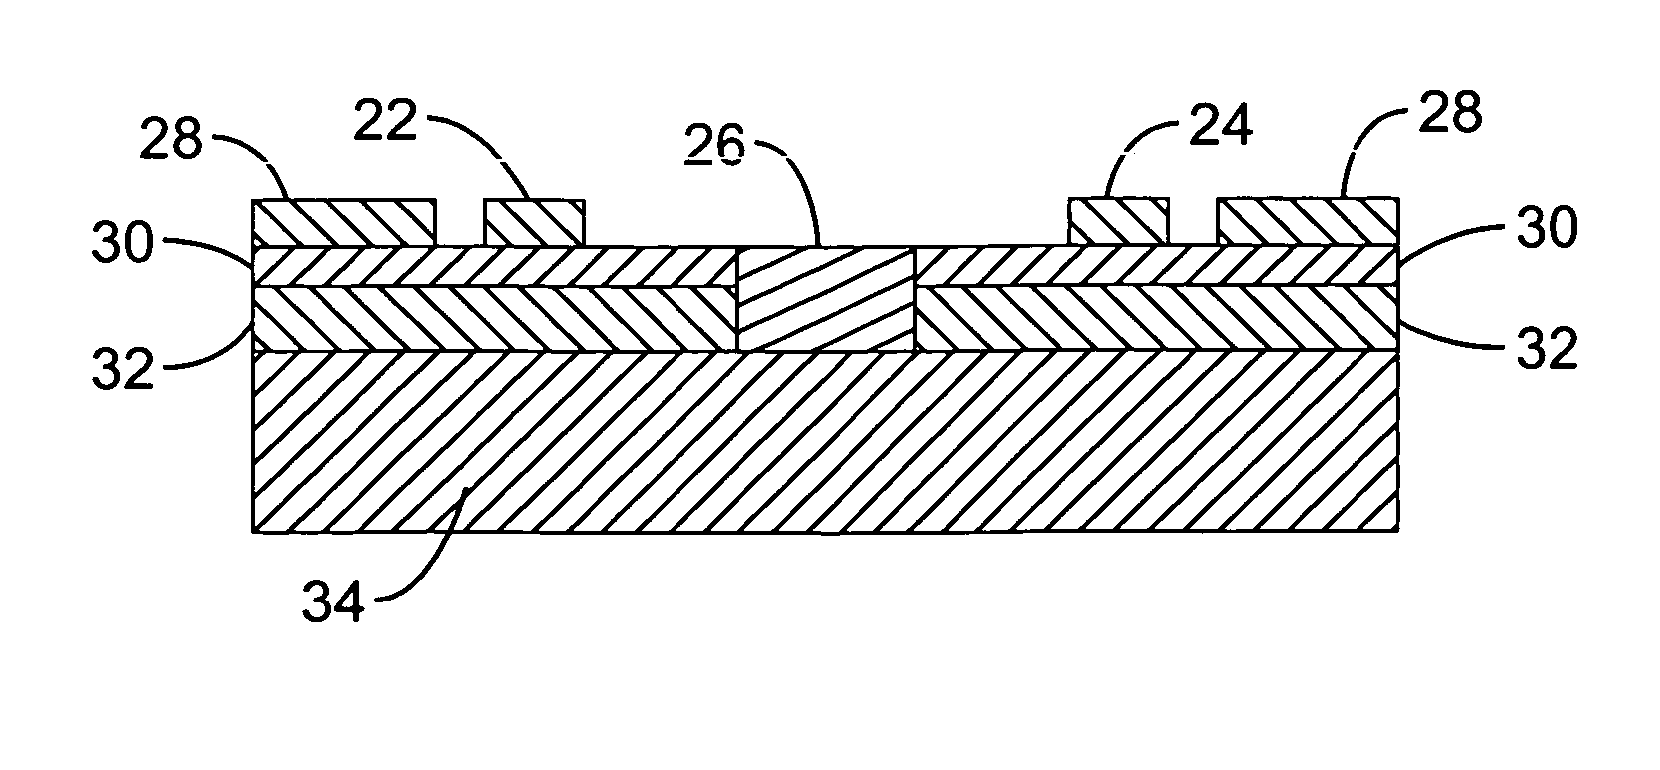 Low crosstalk substrate for mixed-signal integrated circuits